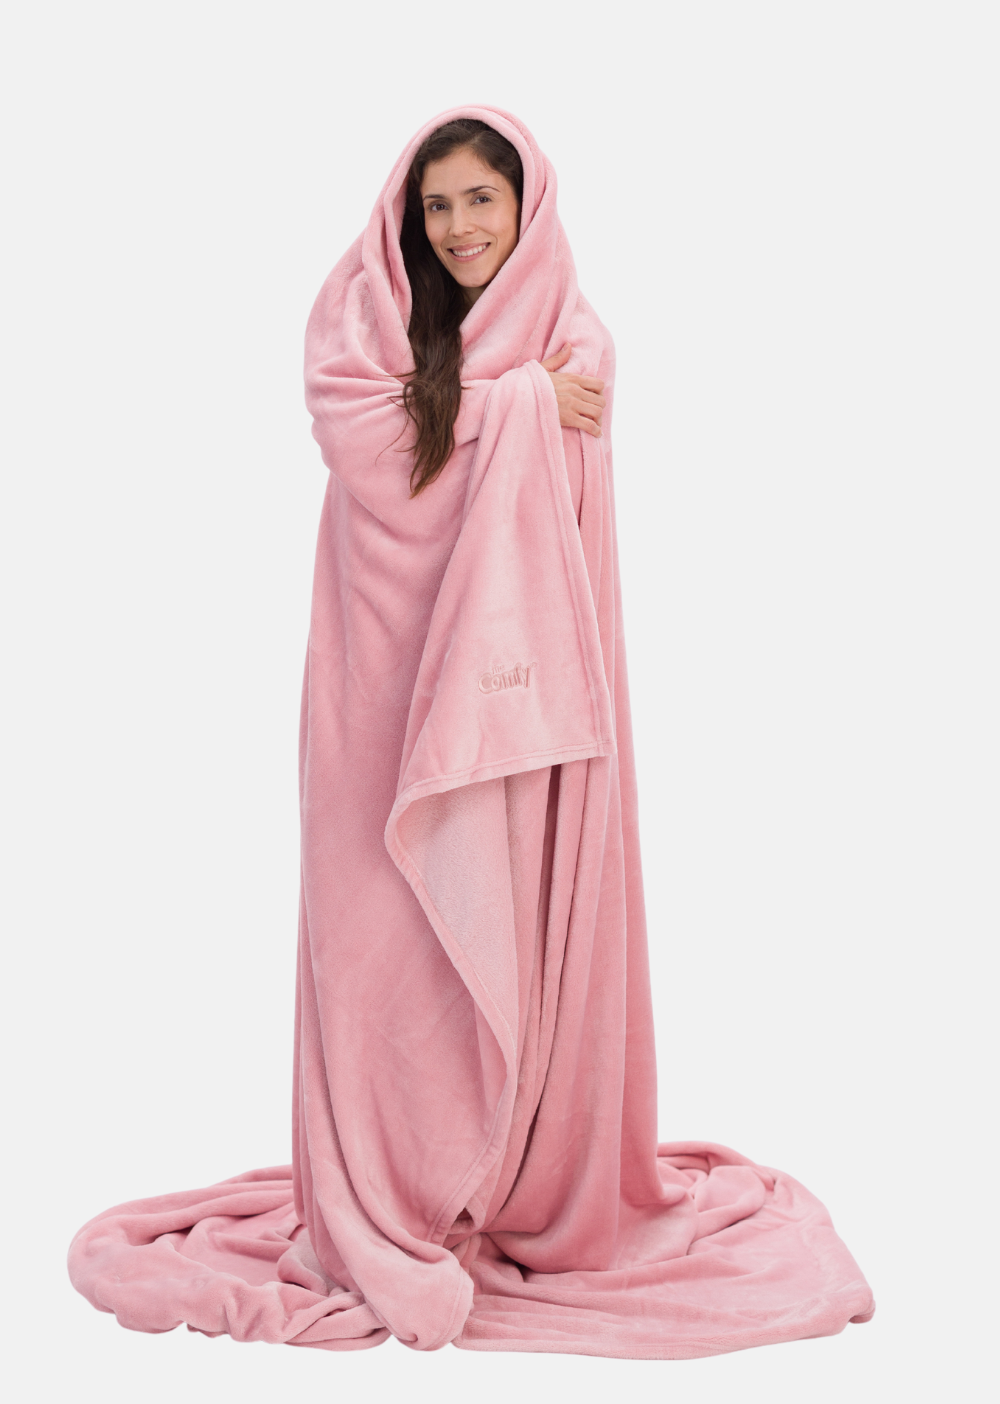 The Comfy  The Blanket You Wear!